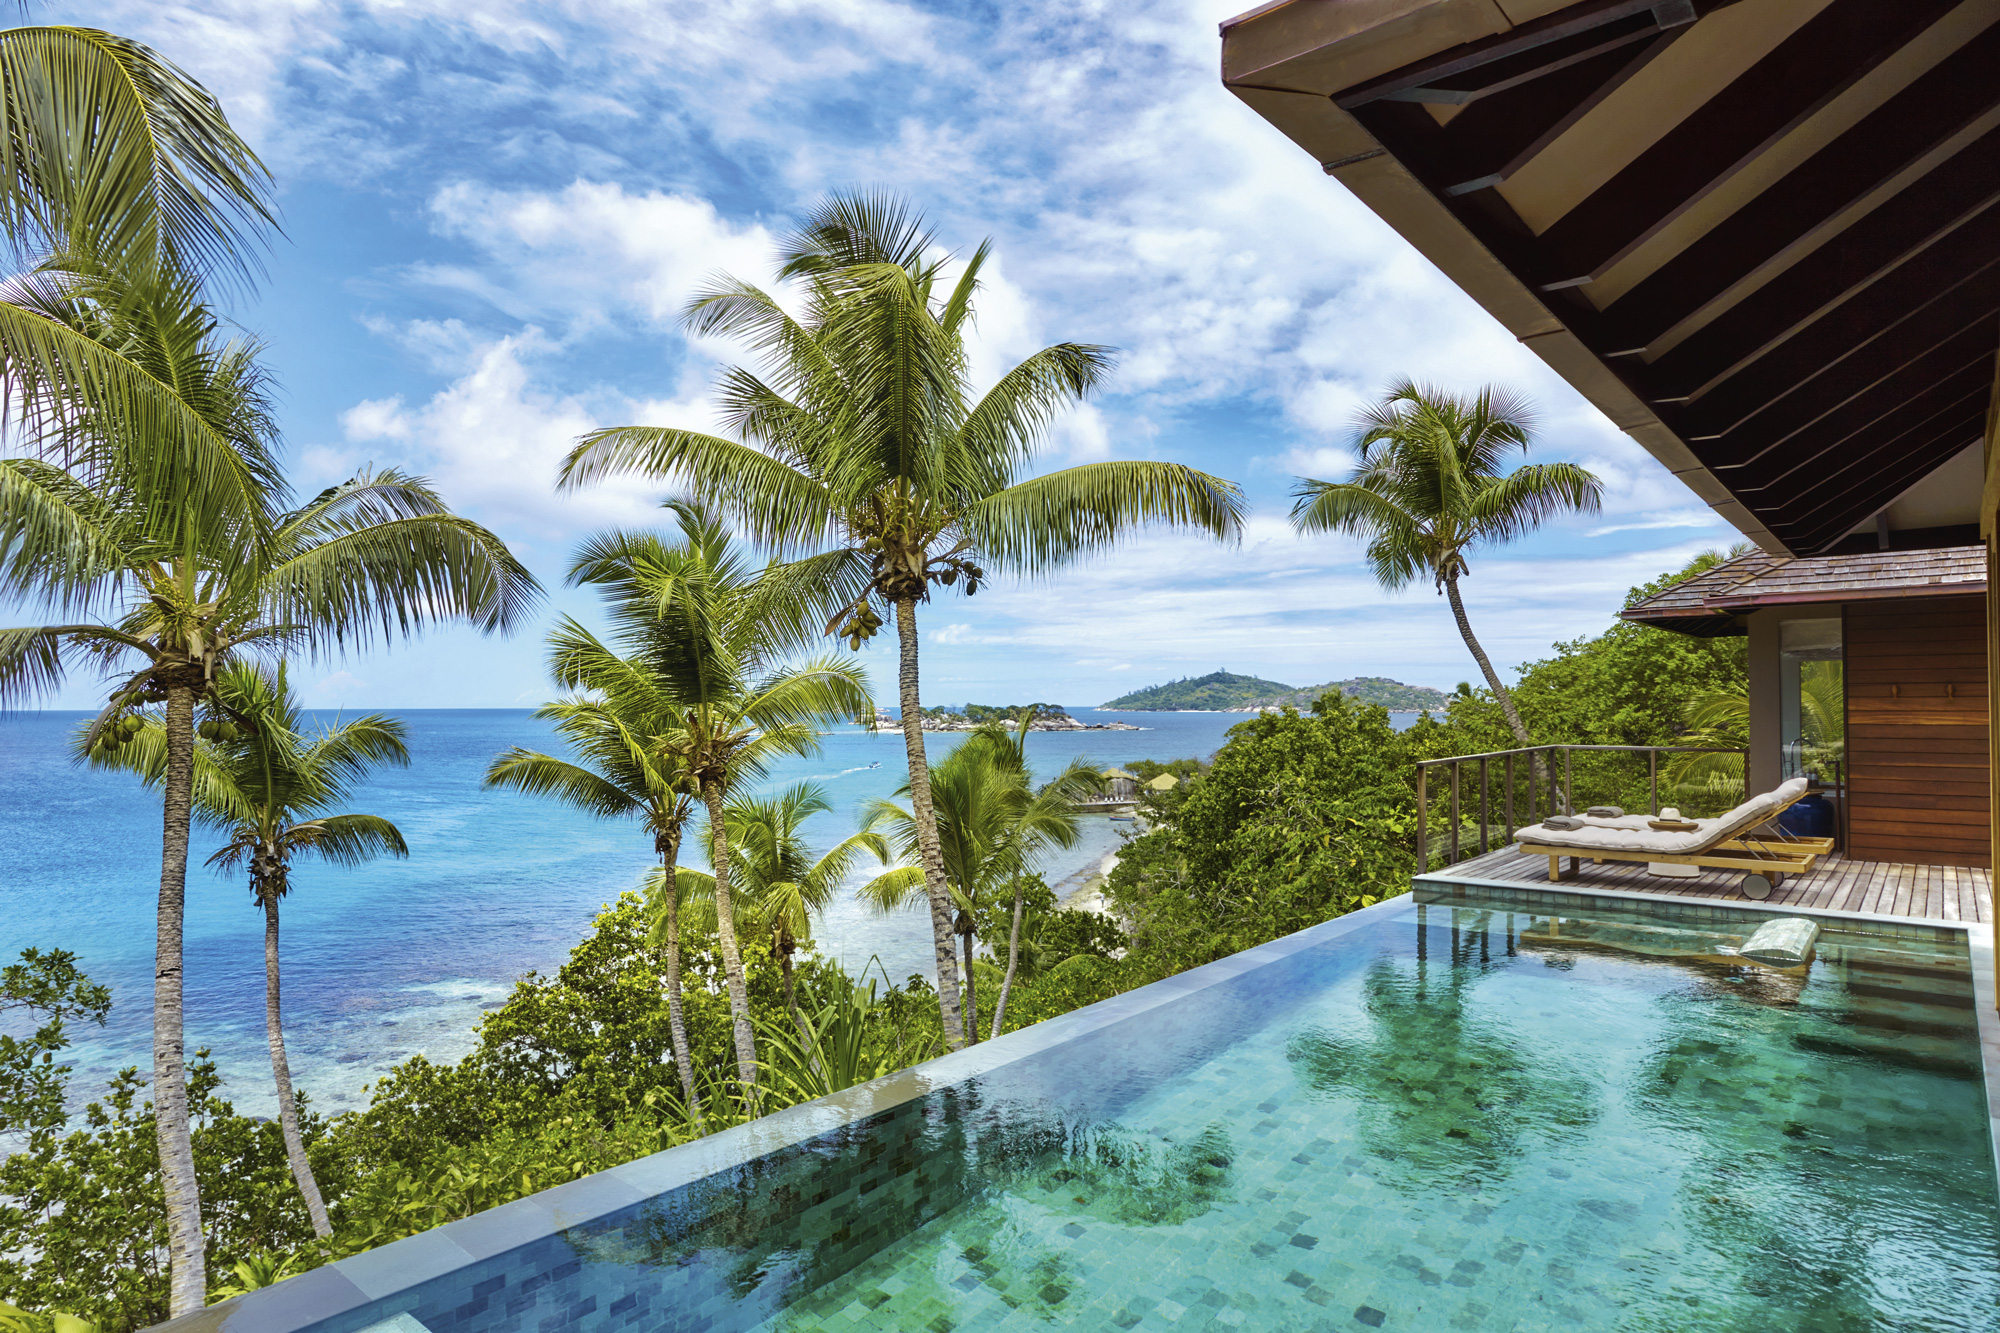 The Seychelles Islands - View and Villa